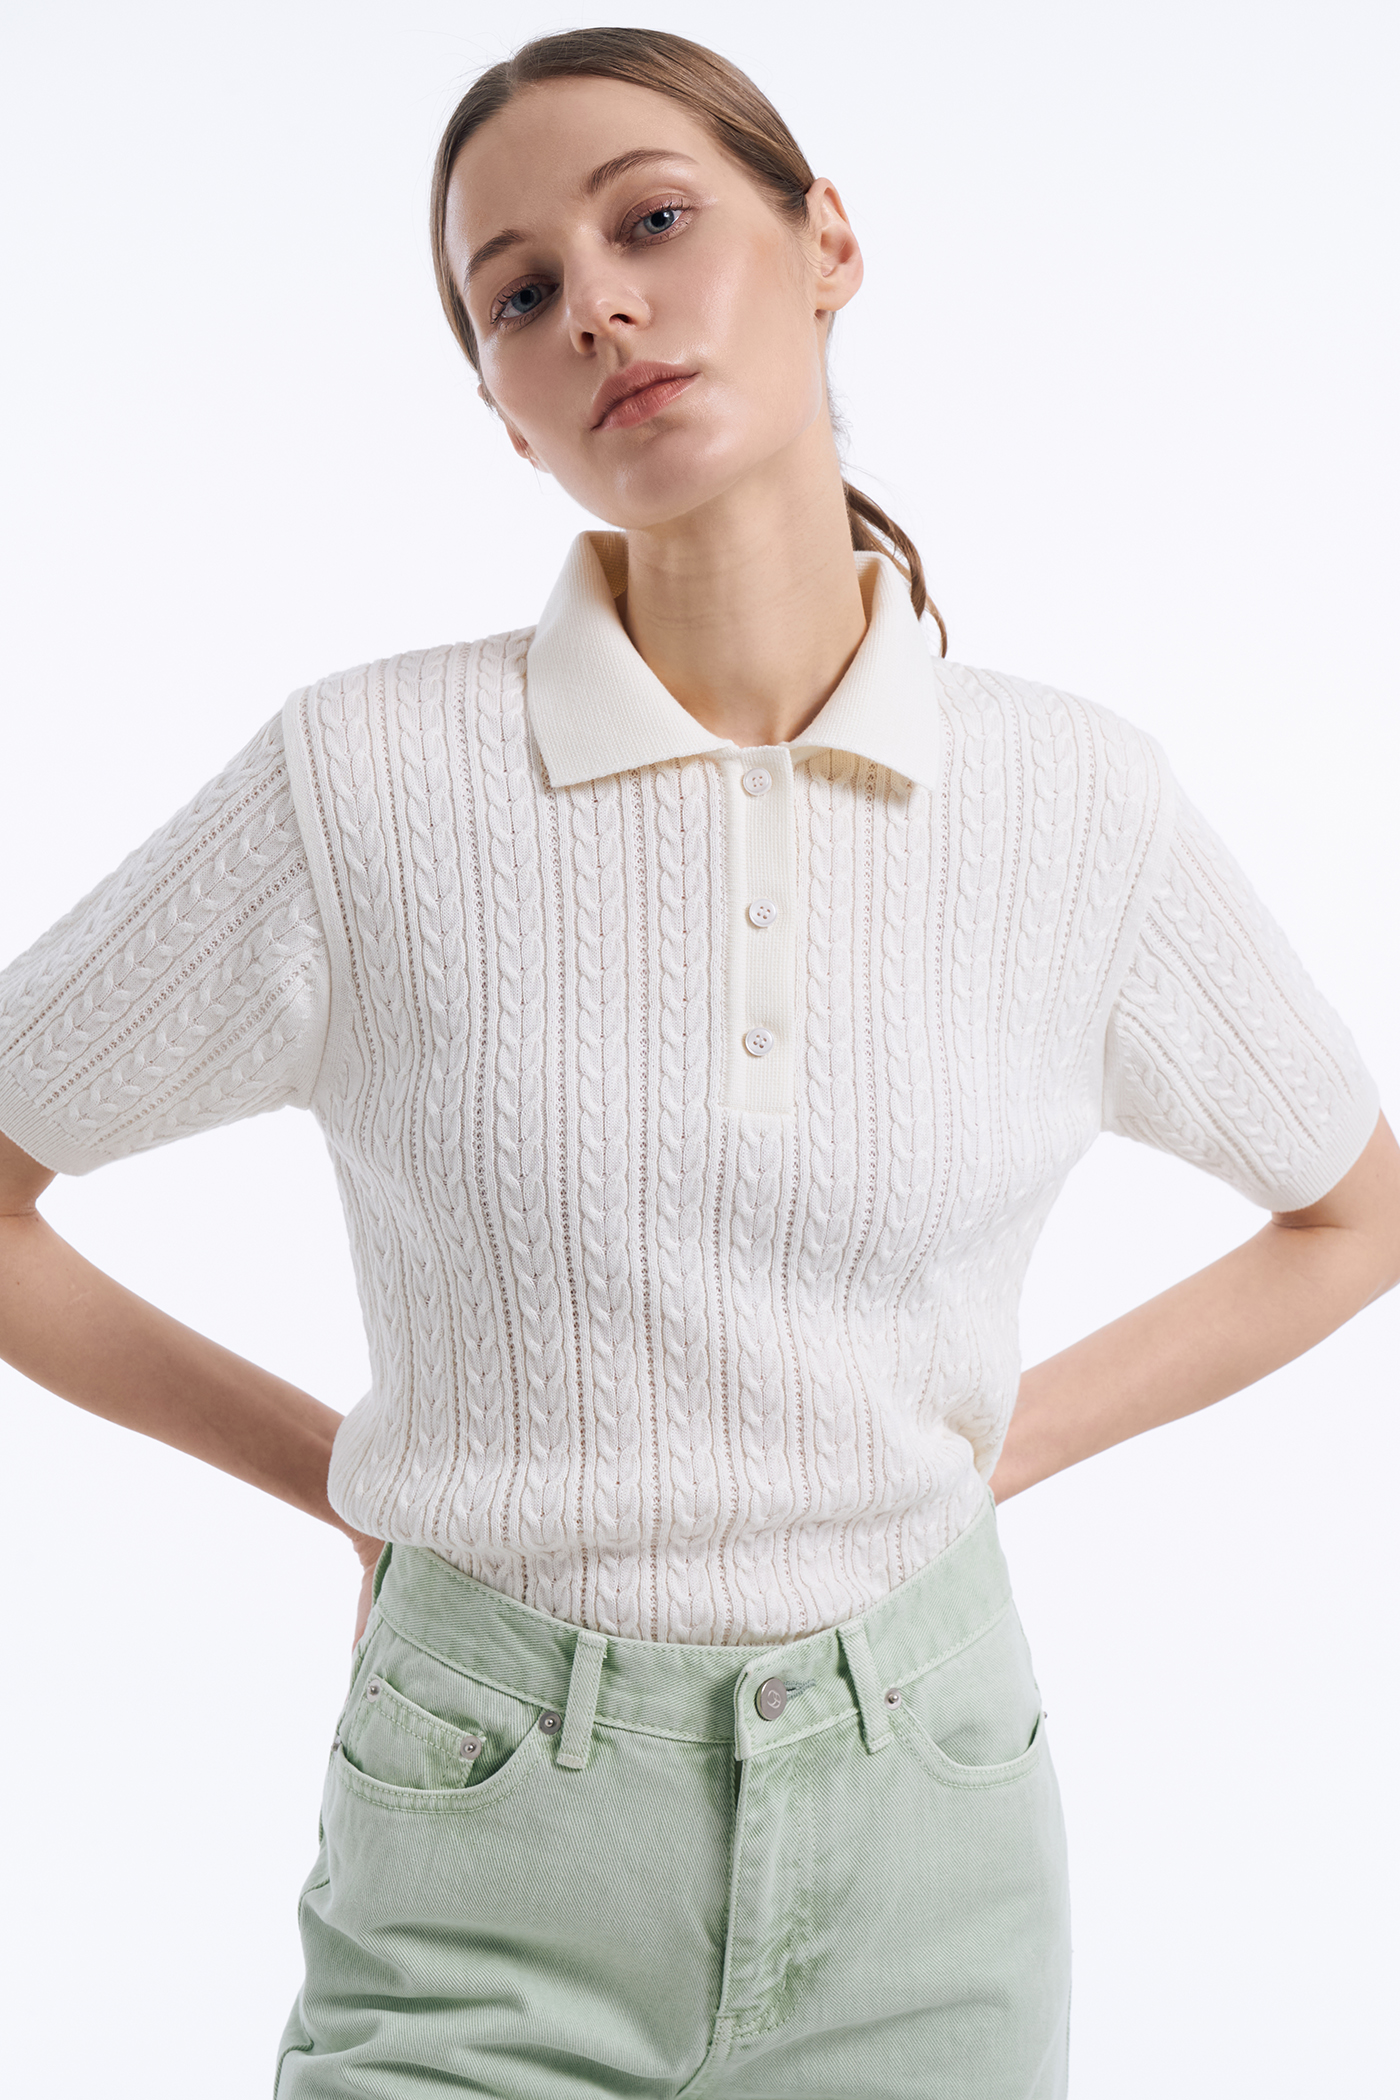 Cable Collar Knit Top[LMBCSPKN165]-5color